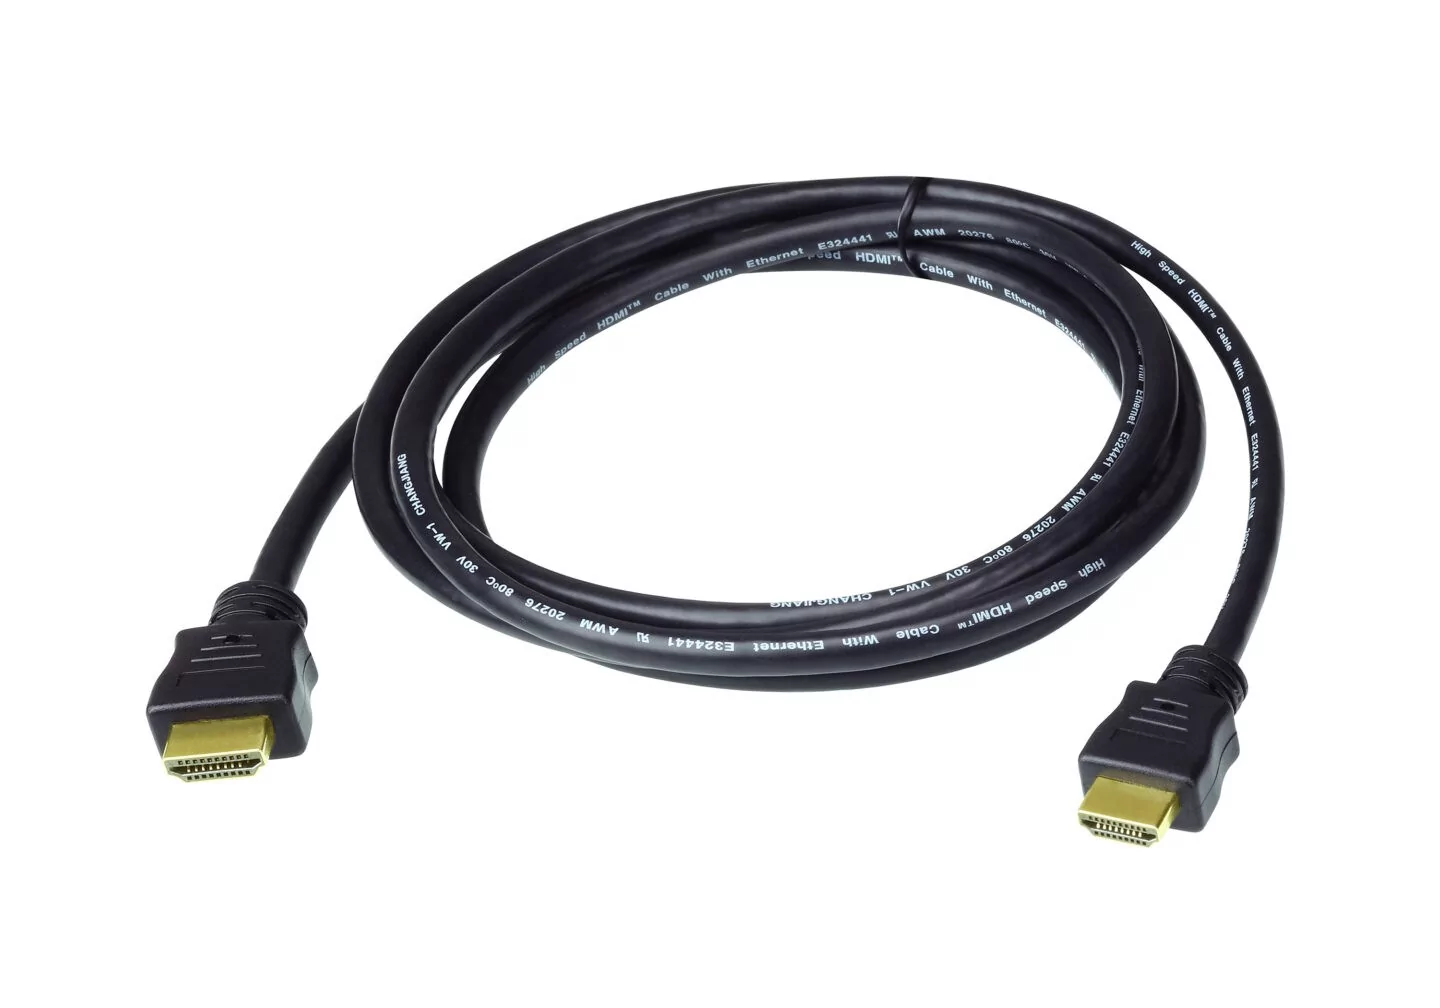 HDMI Cable; Buy High Quality Round HDMI Cable Best Price in Sri Lanka | ido.lk